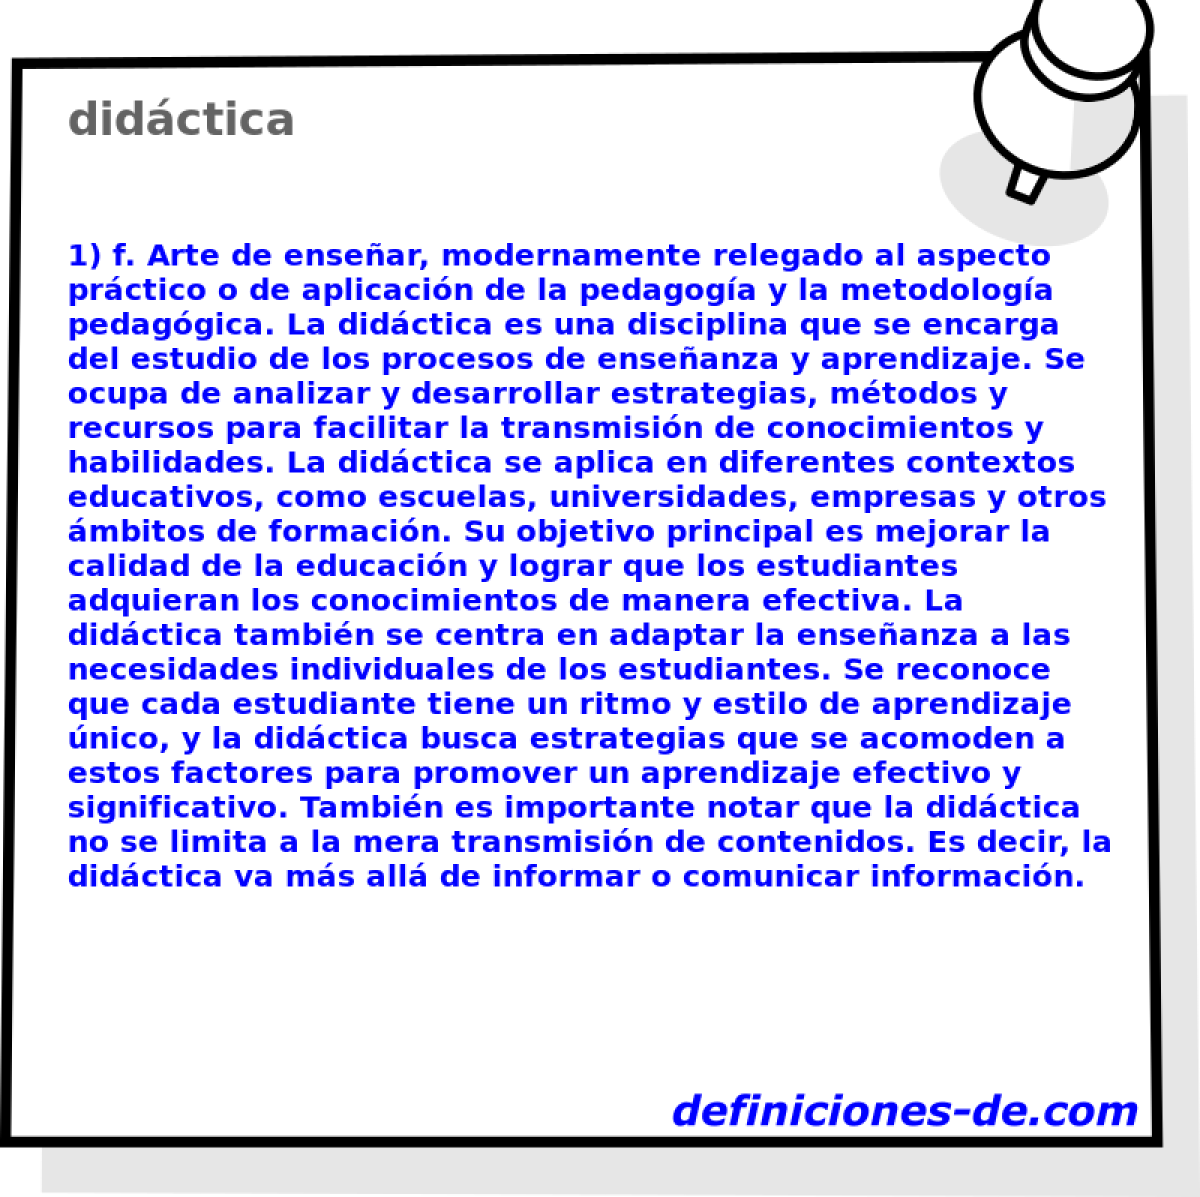 didctica 